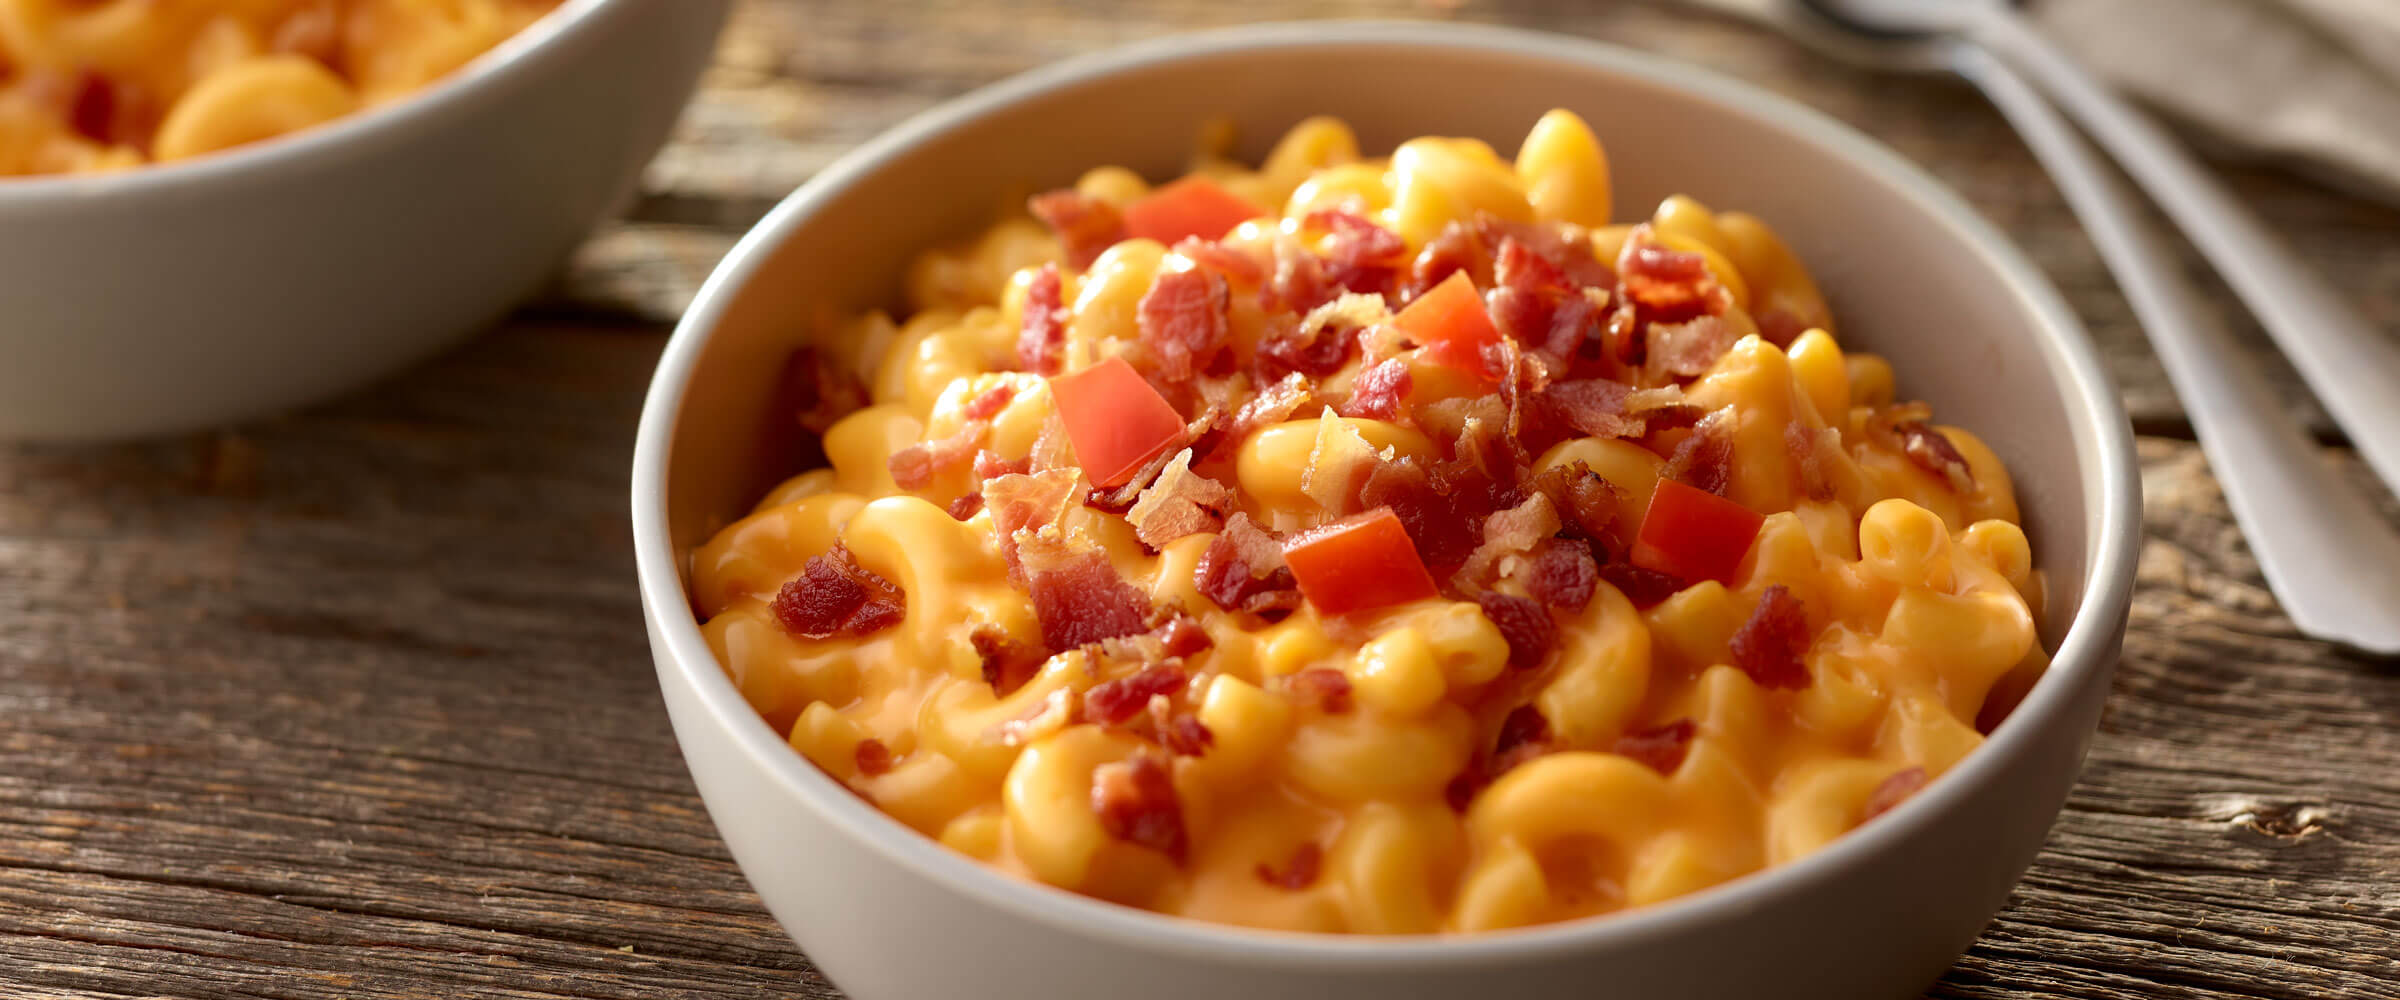 Triple Macaroni & Cheese topped with bacon bits and tomatoes on wood table